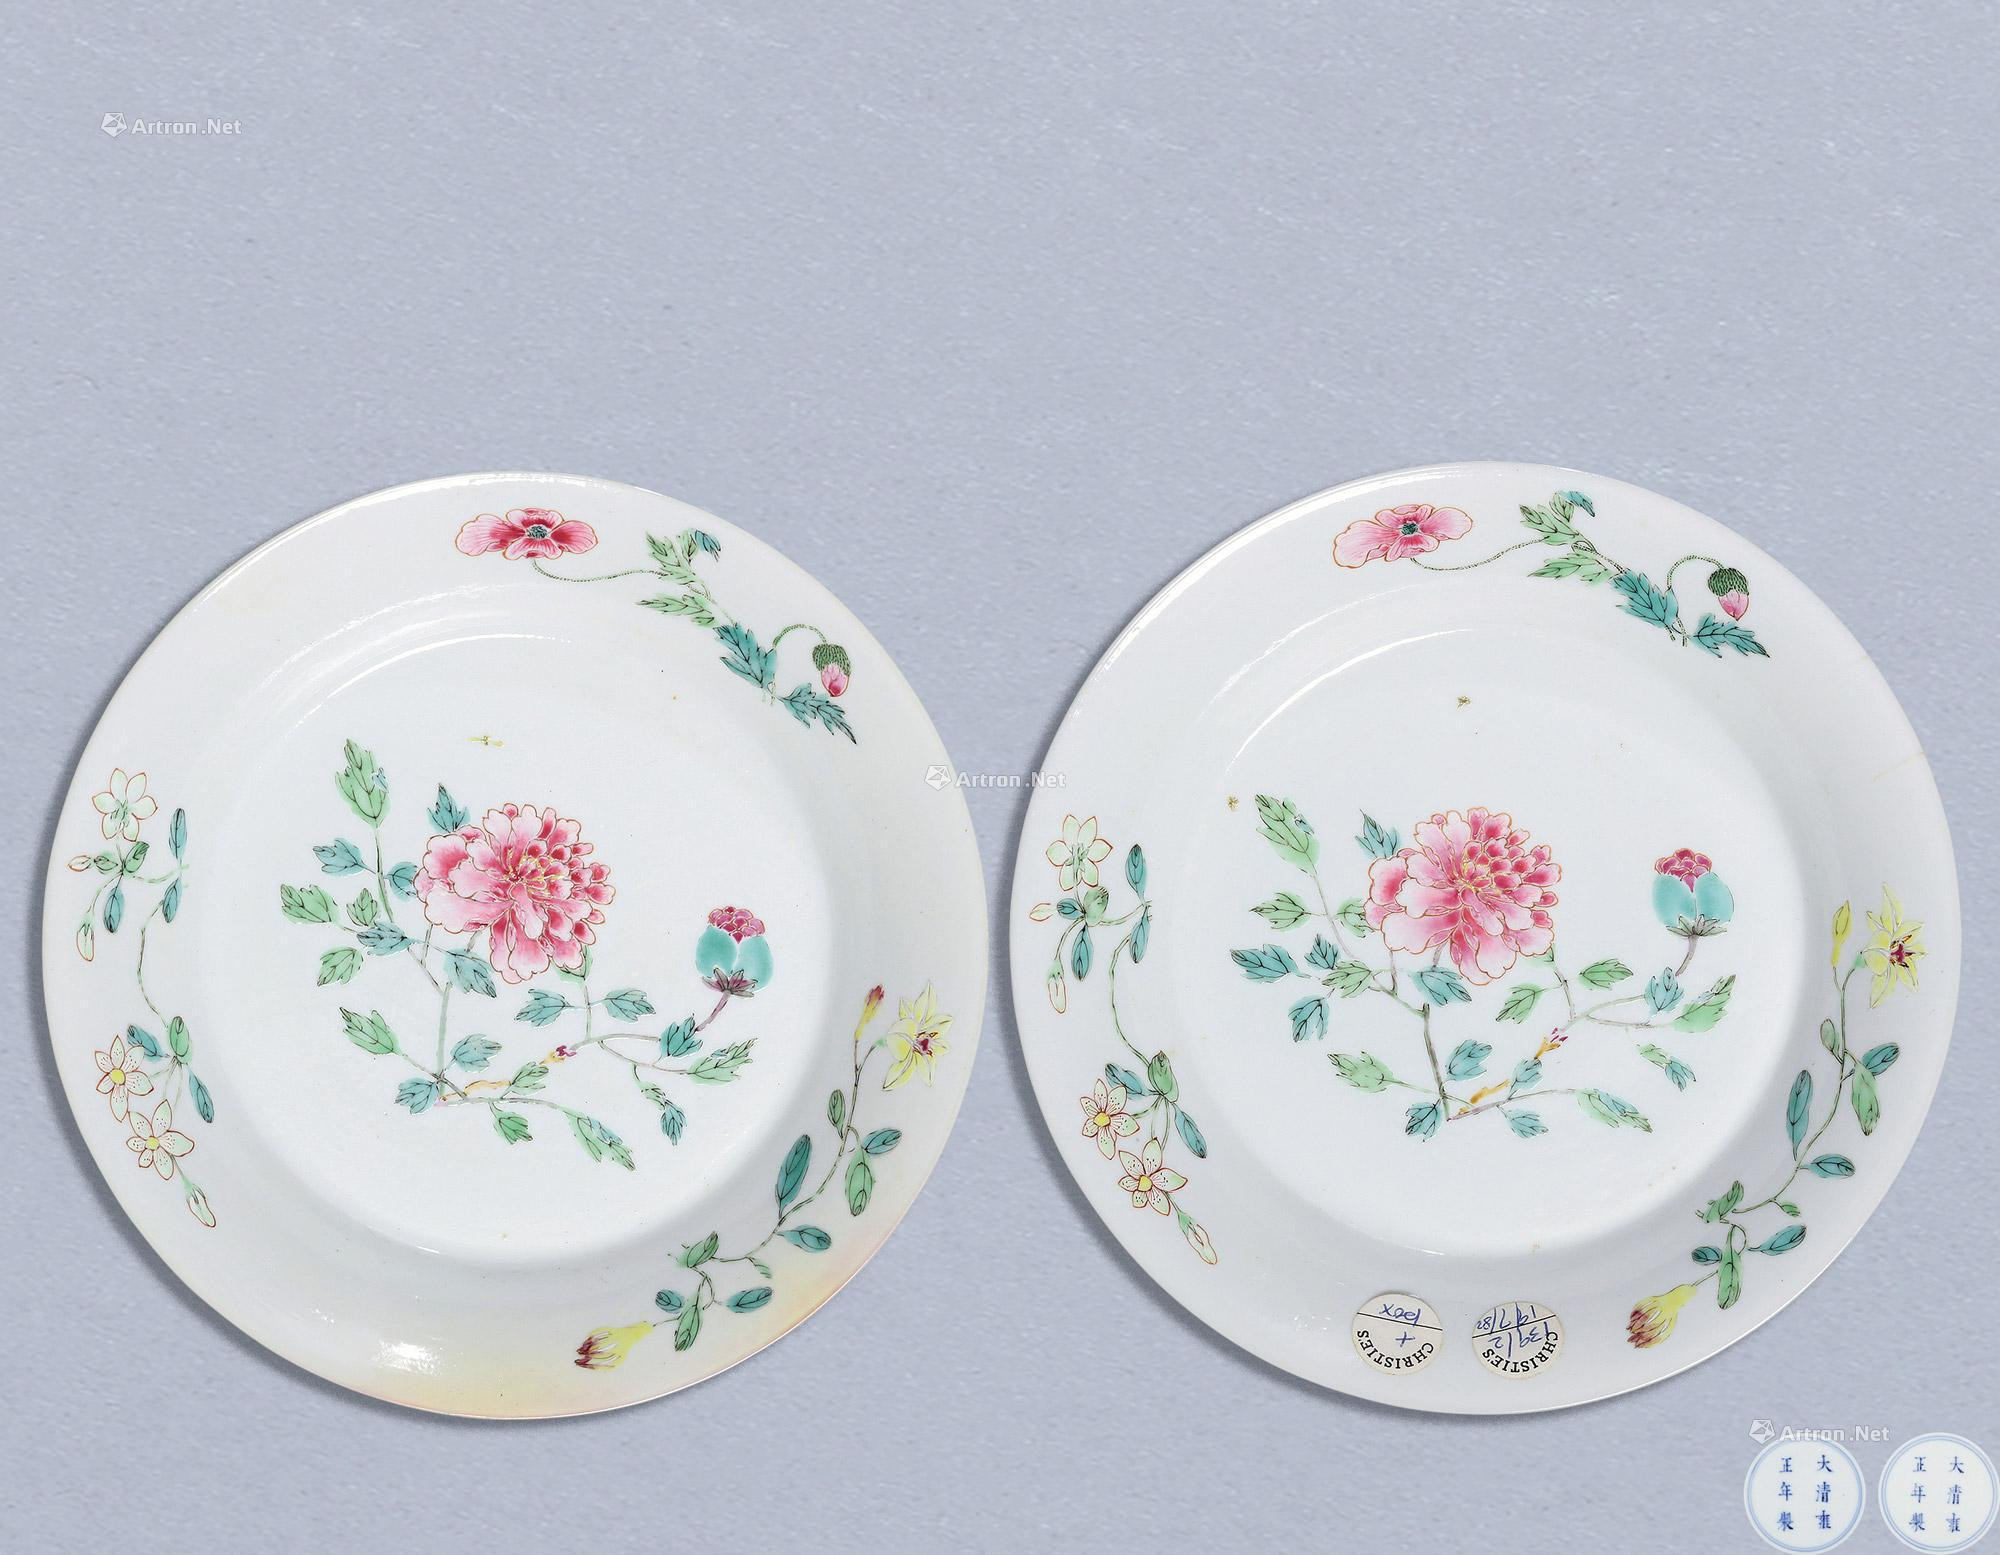 A PAIR OF FAMILLE-ROSE FLOWERS PLATES